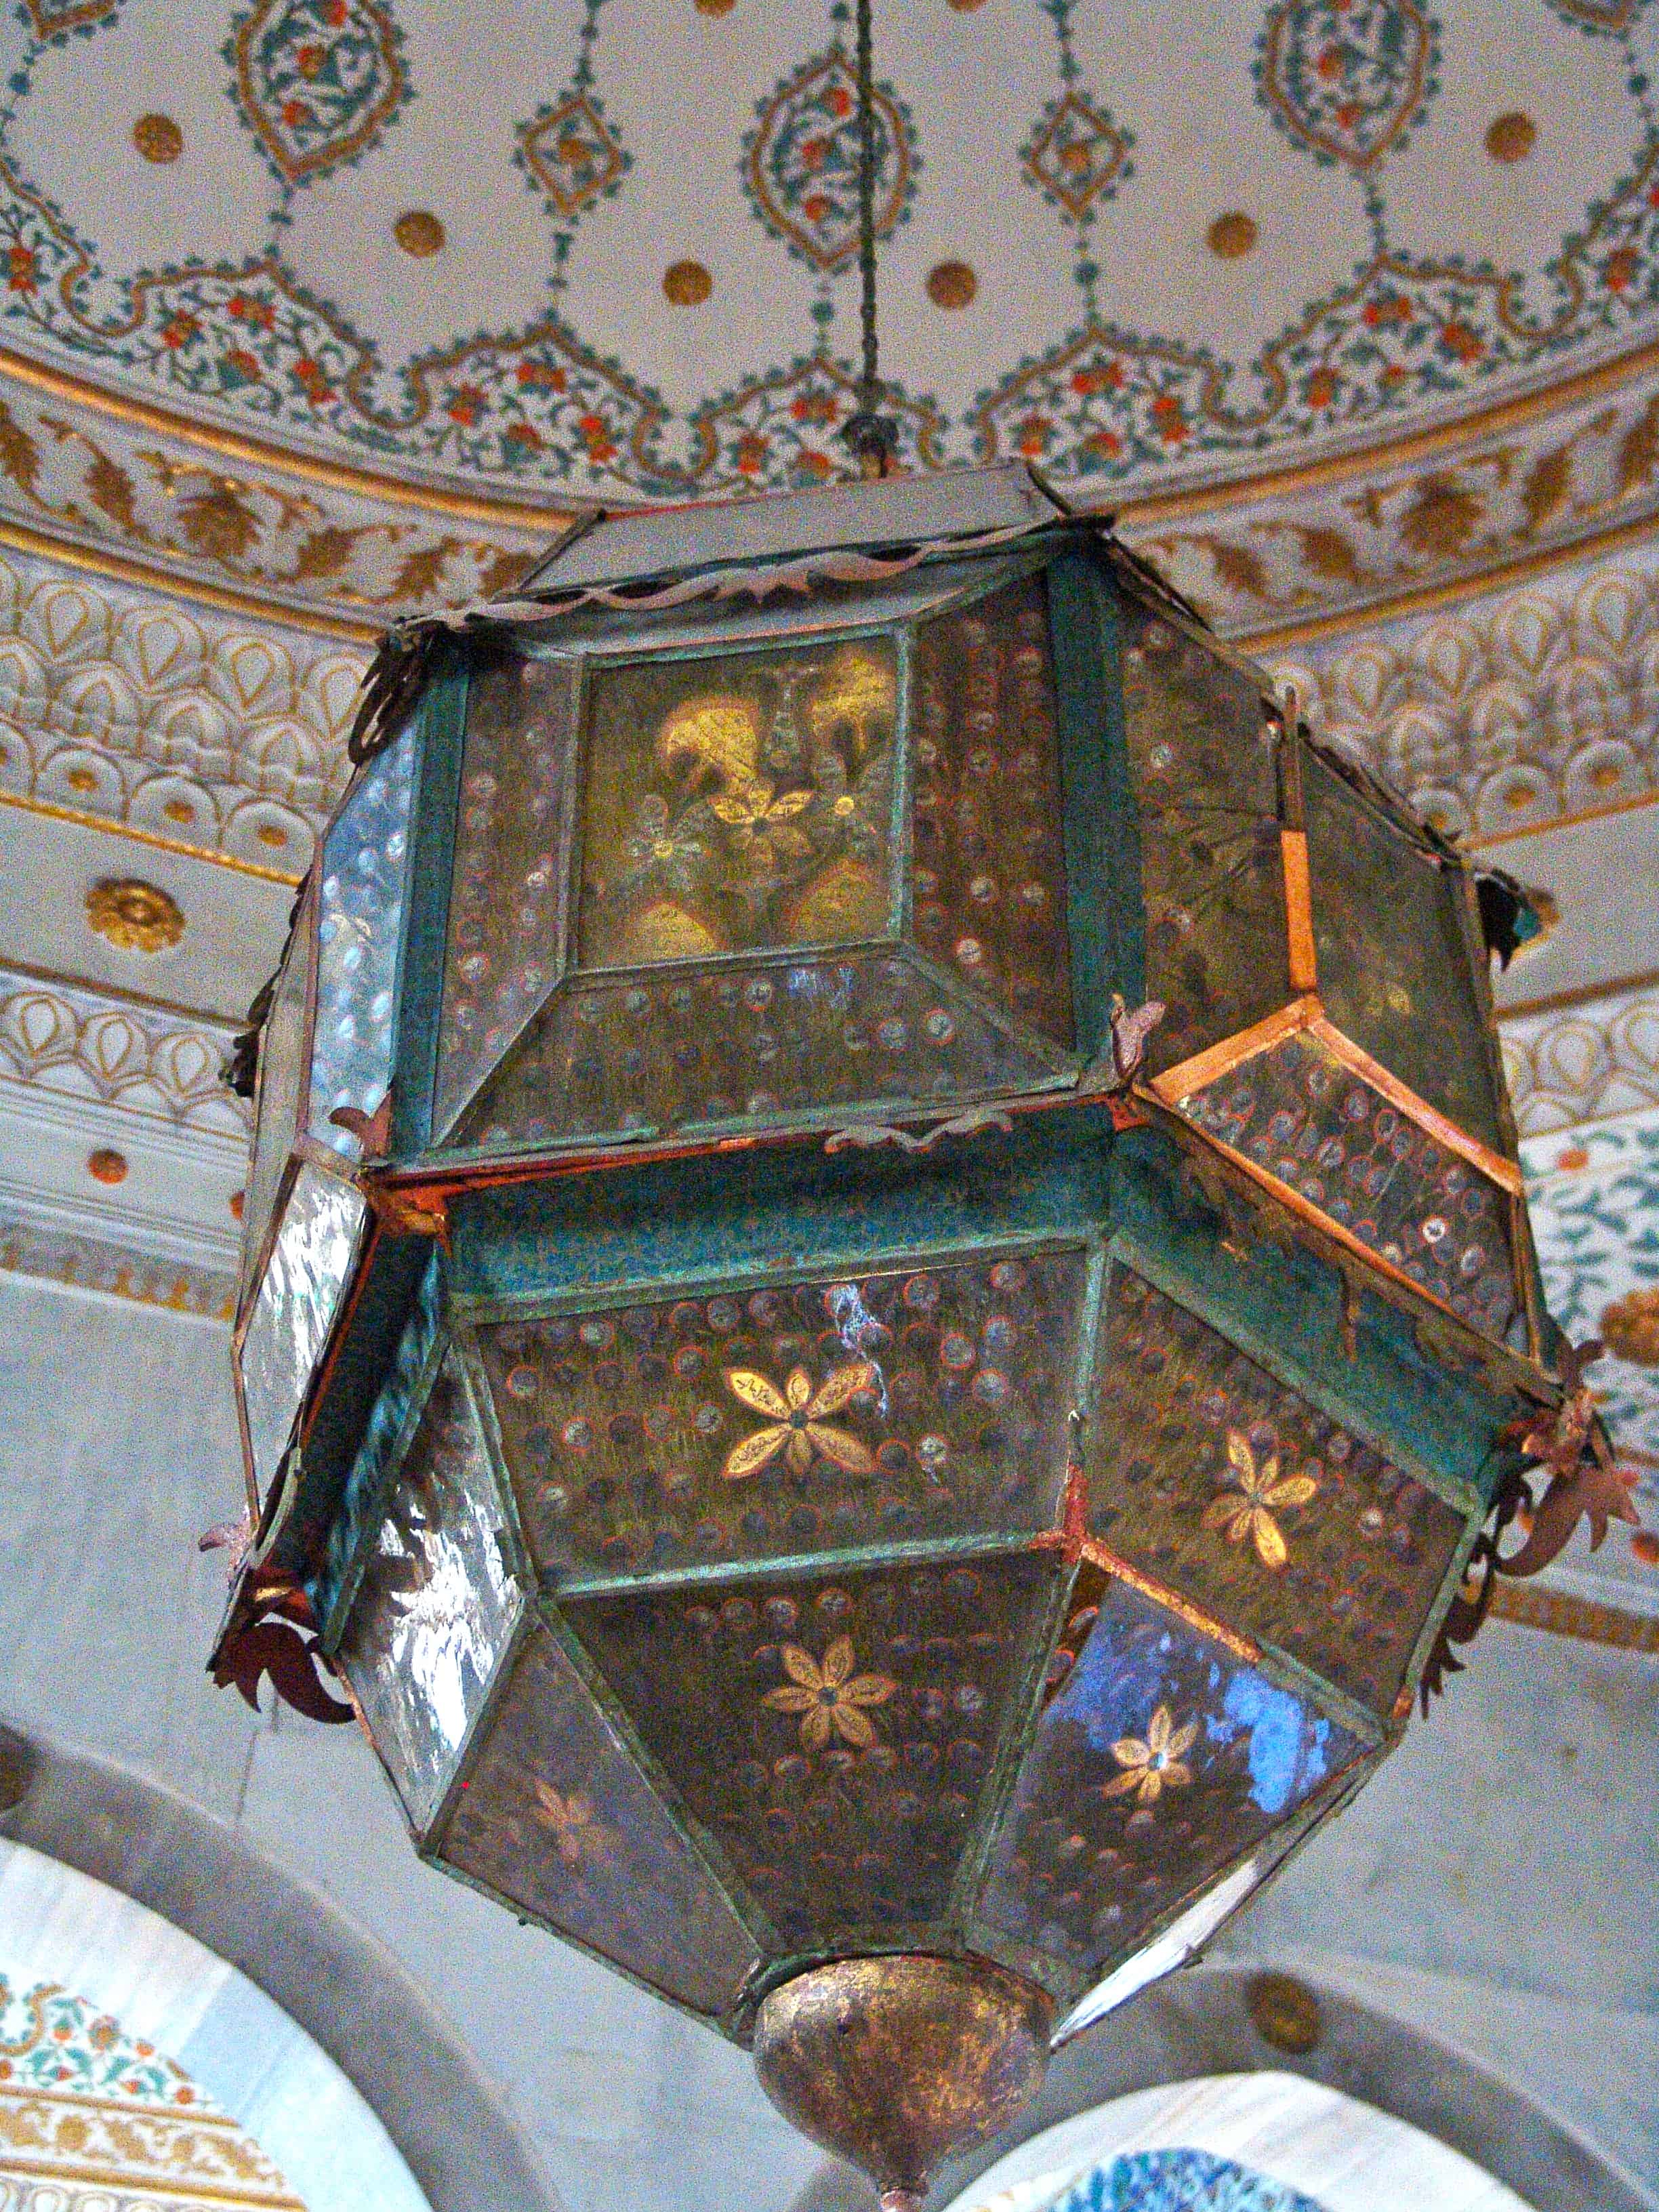 Lantern at the Enderûn Library at Topkapi Palace in Istanbul, Turkey